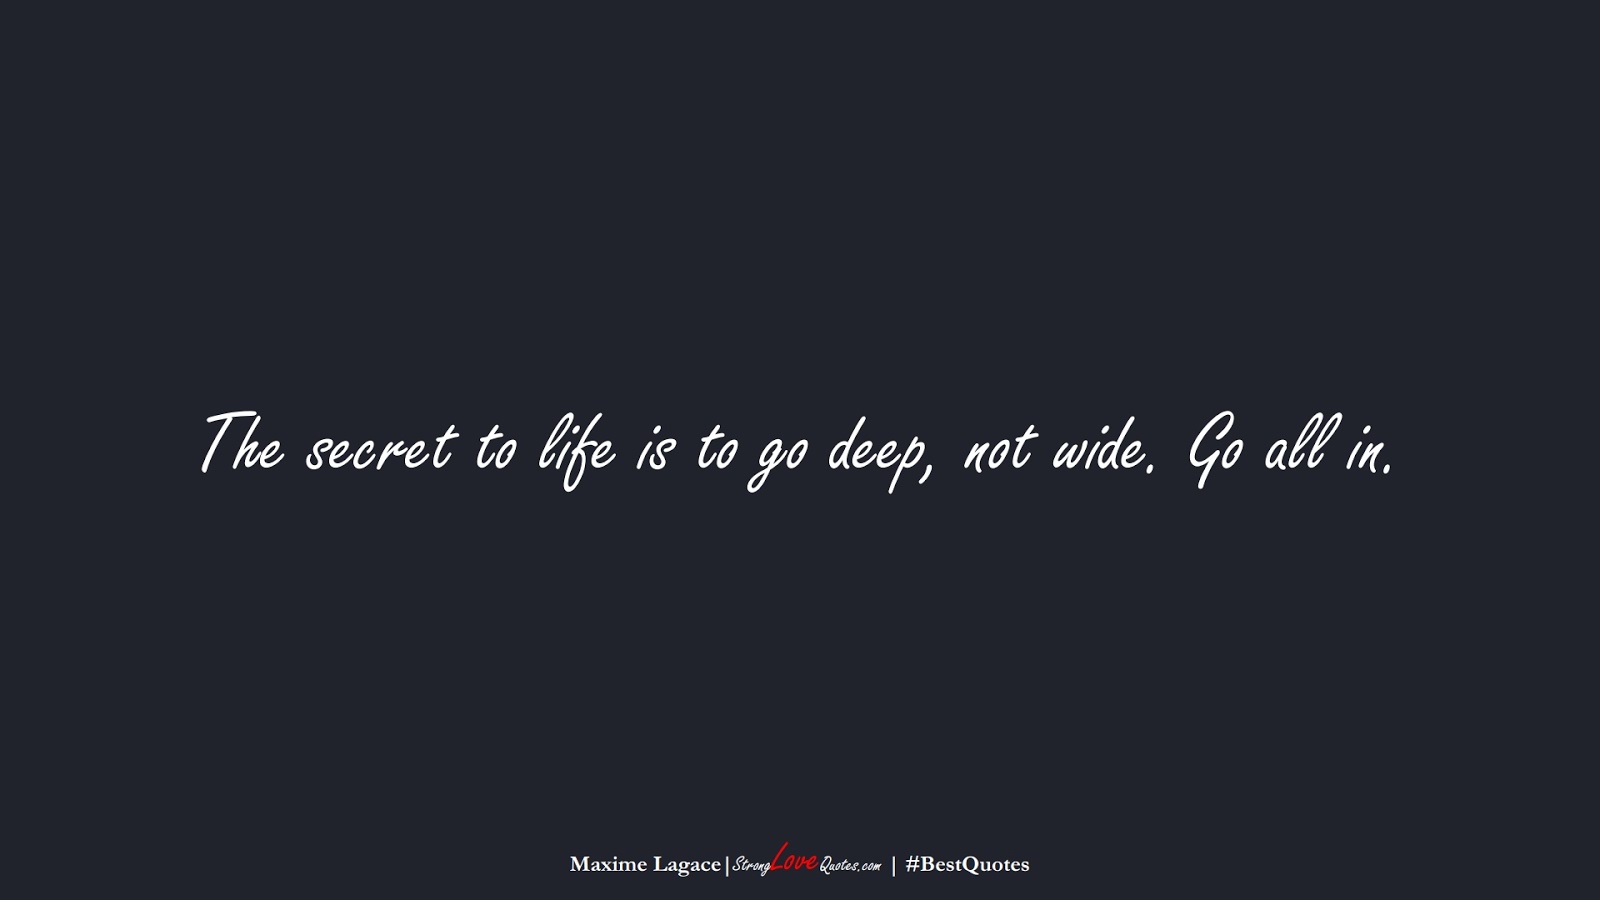 The secret to life is to go deep, not wide. Go all in. (Maxime Lagace);  #BestQuotes